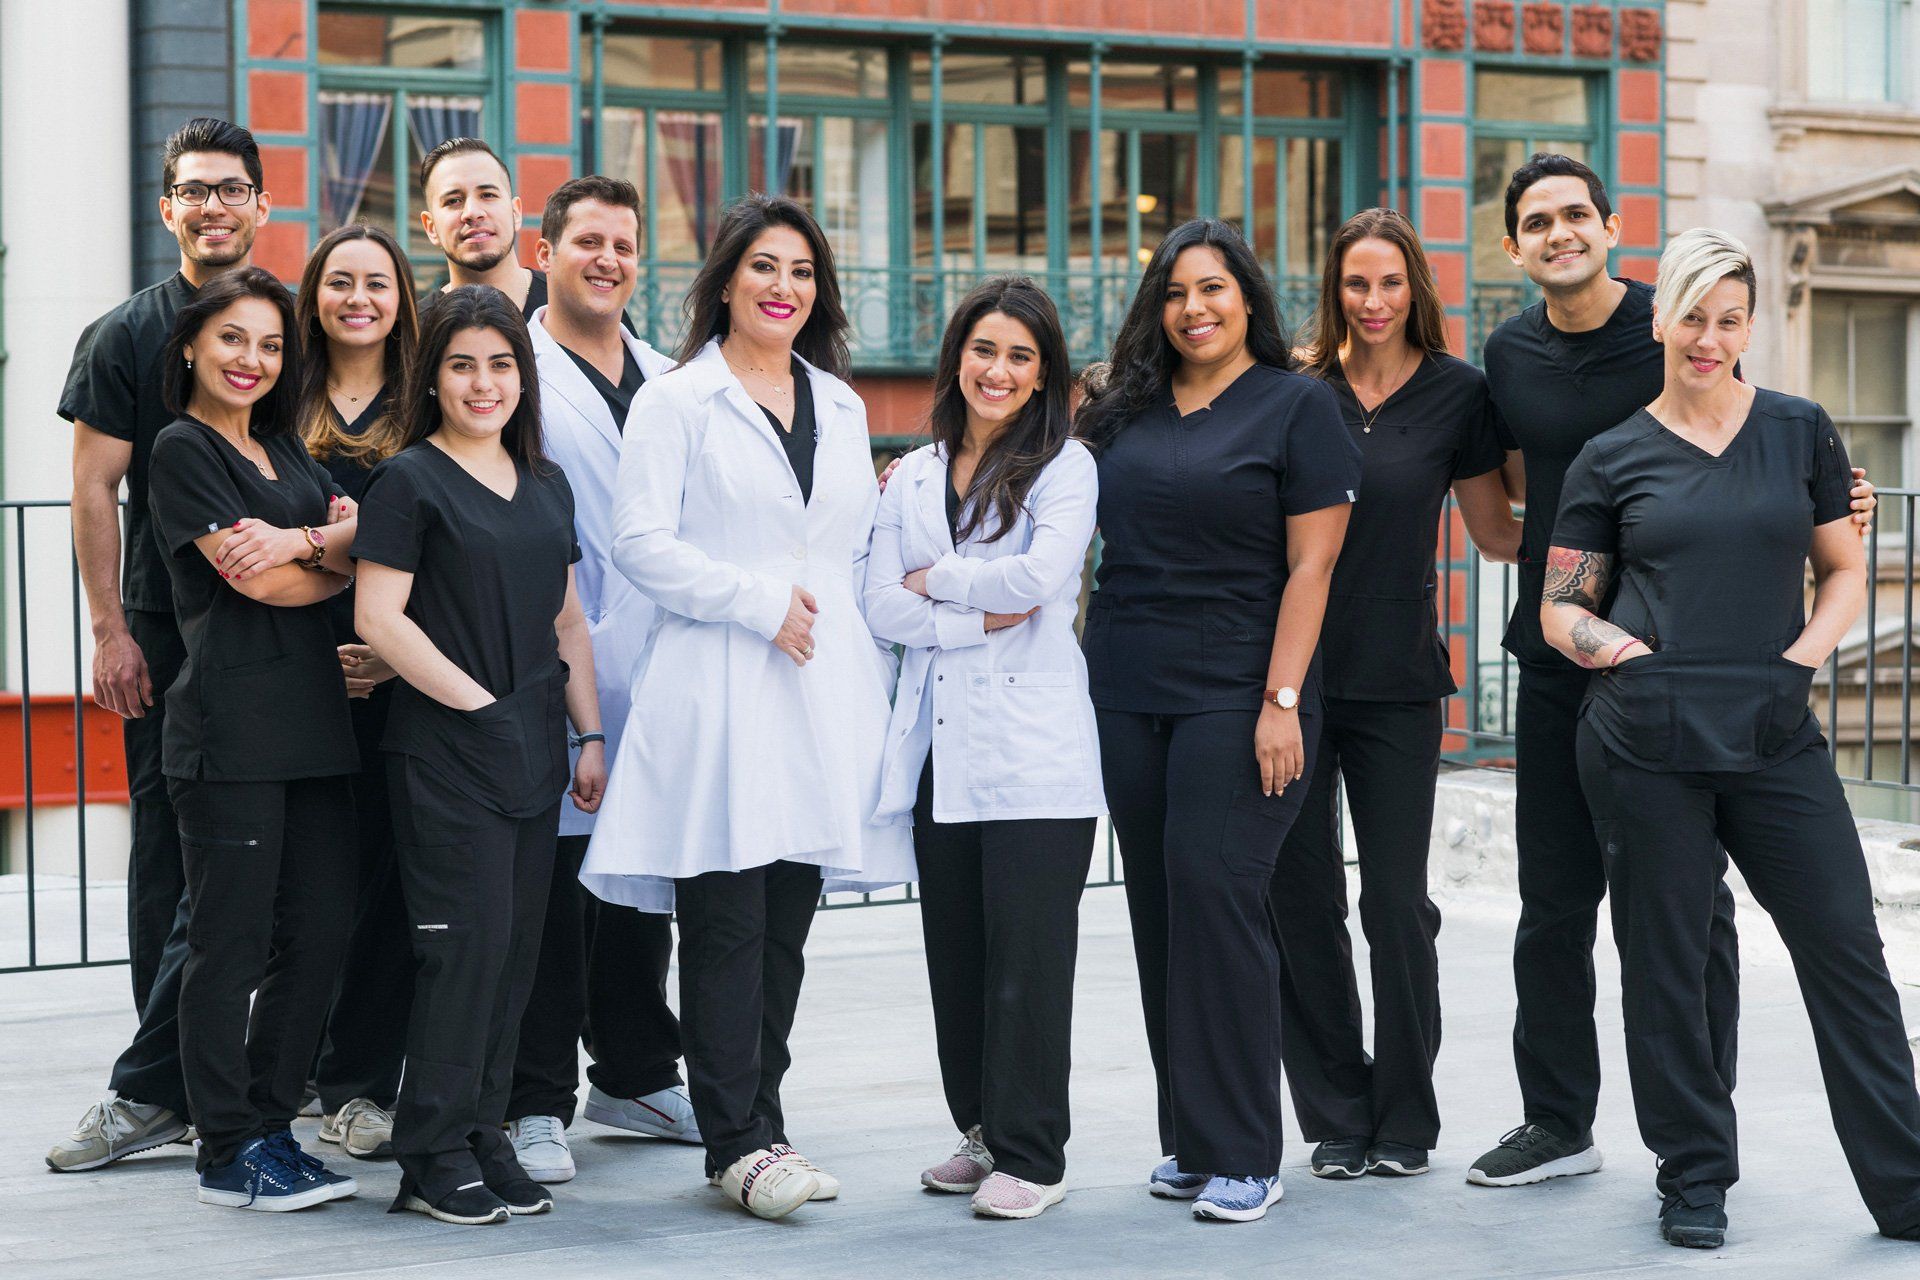 The Warm  and Caring Staff of SoHo Dental Group